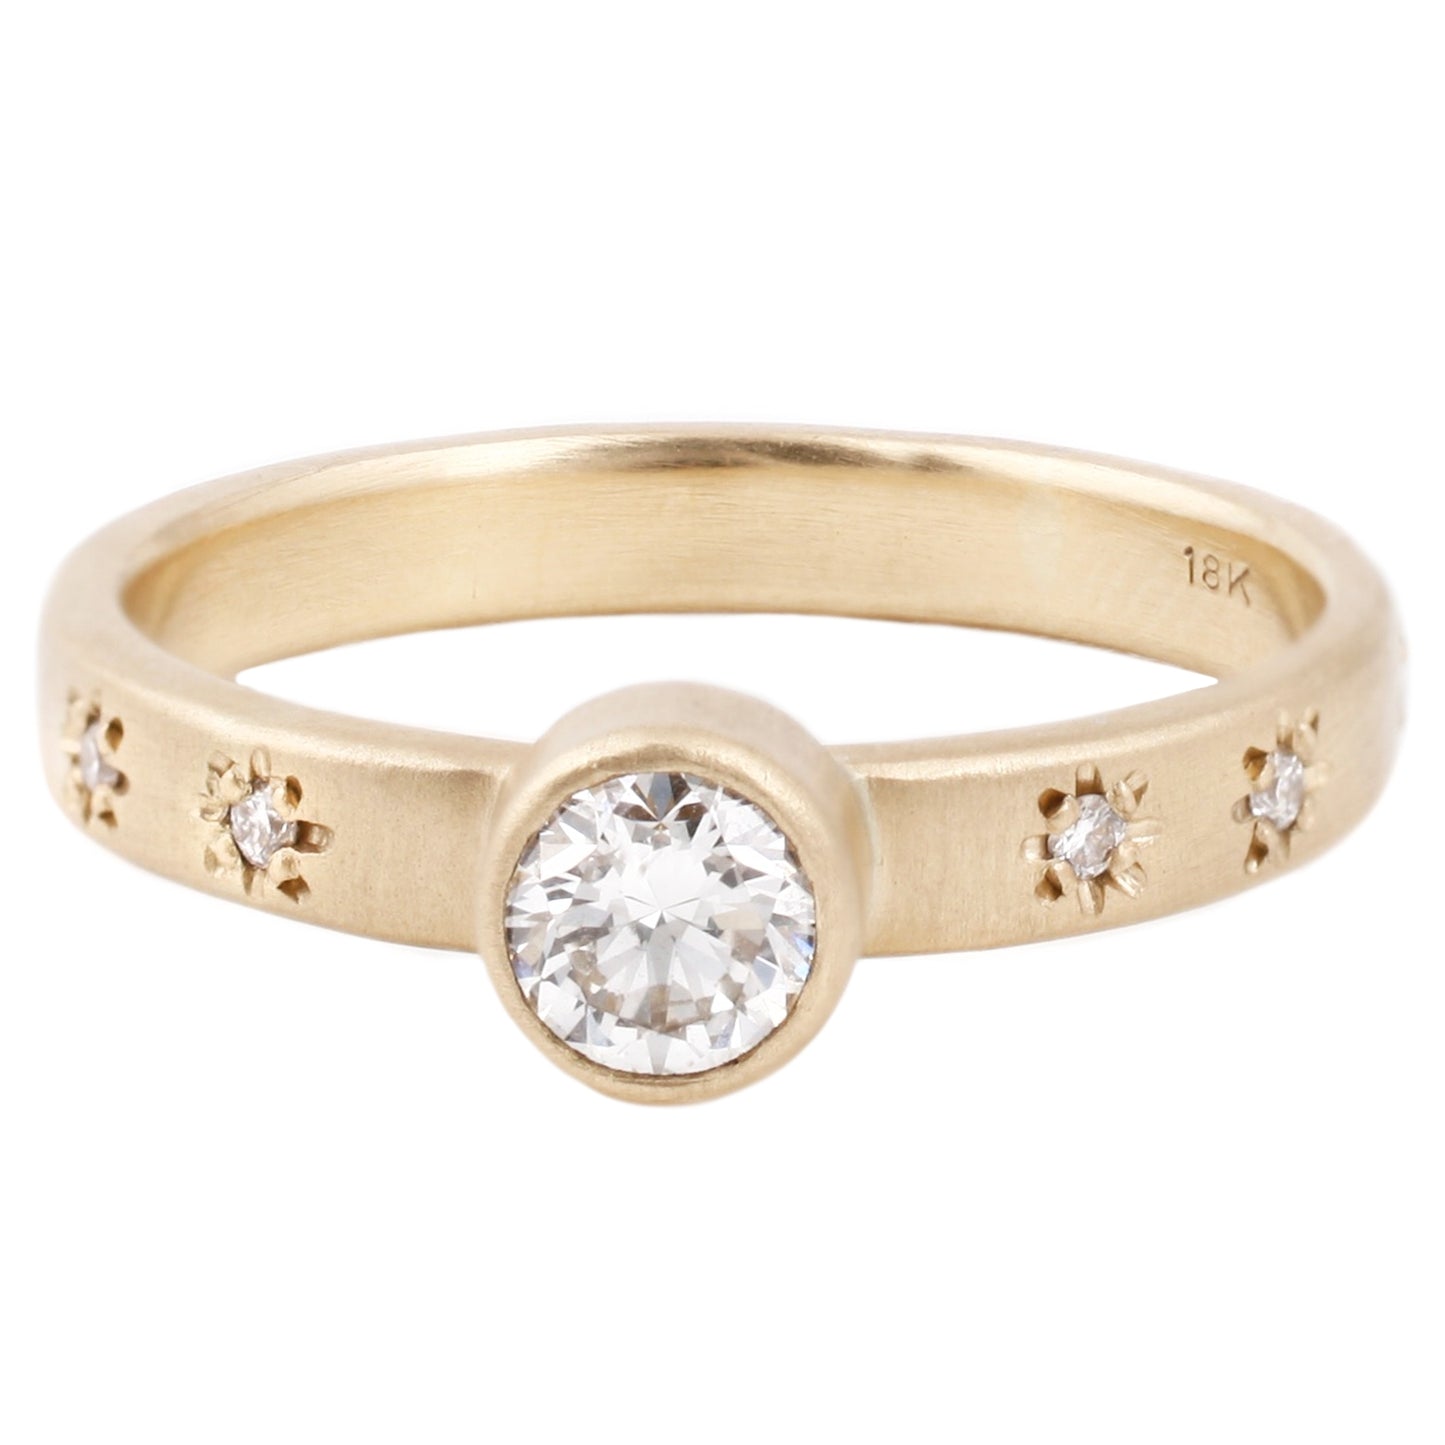 Sarah Swell Starry Sky Diamond Solitaire set in gold